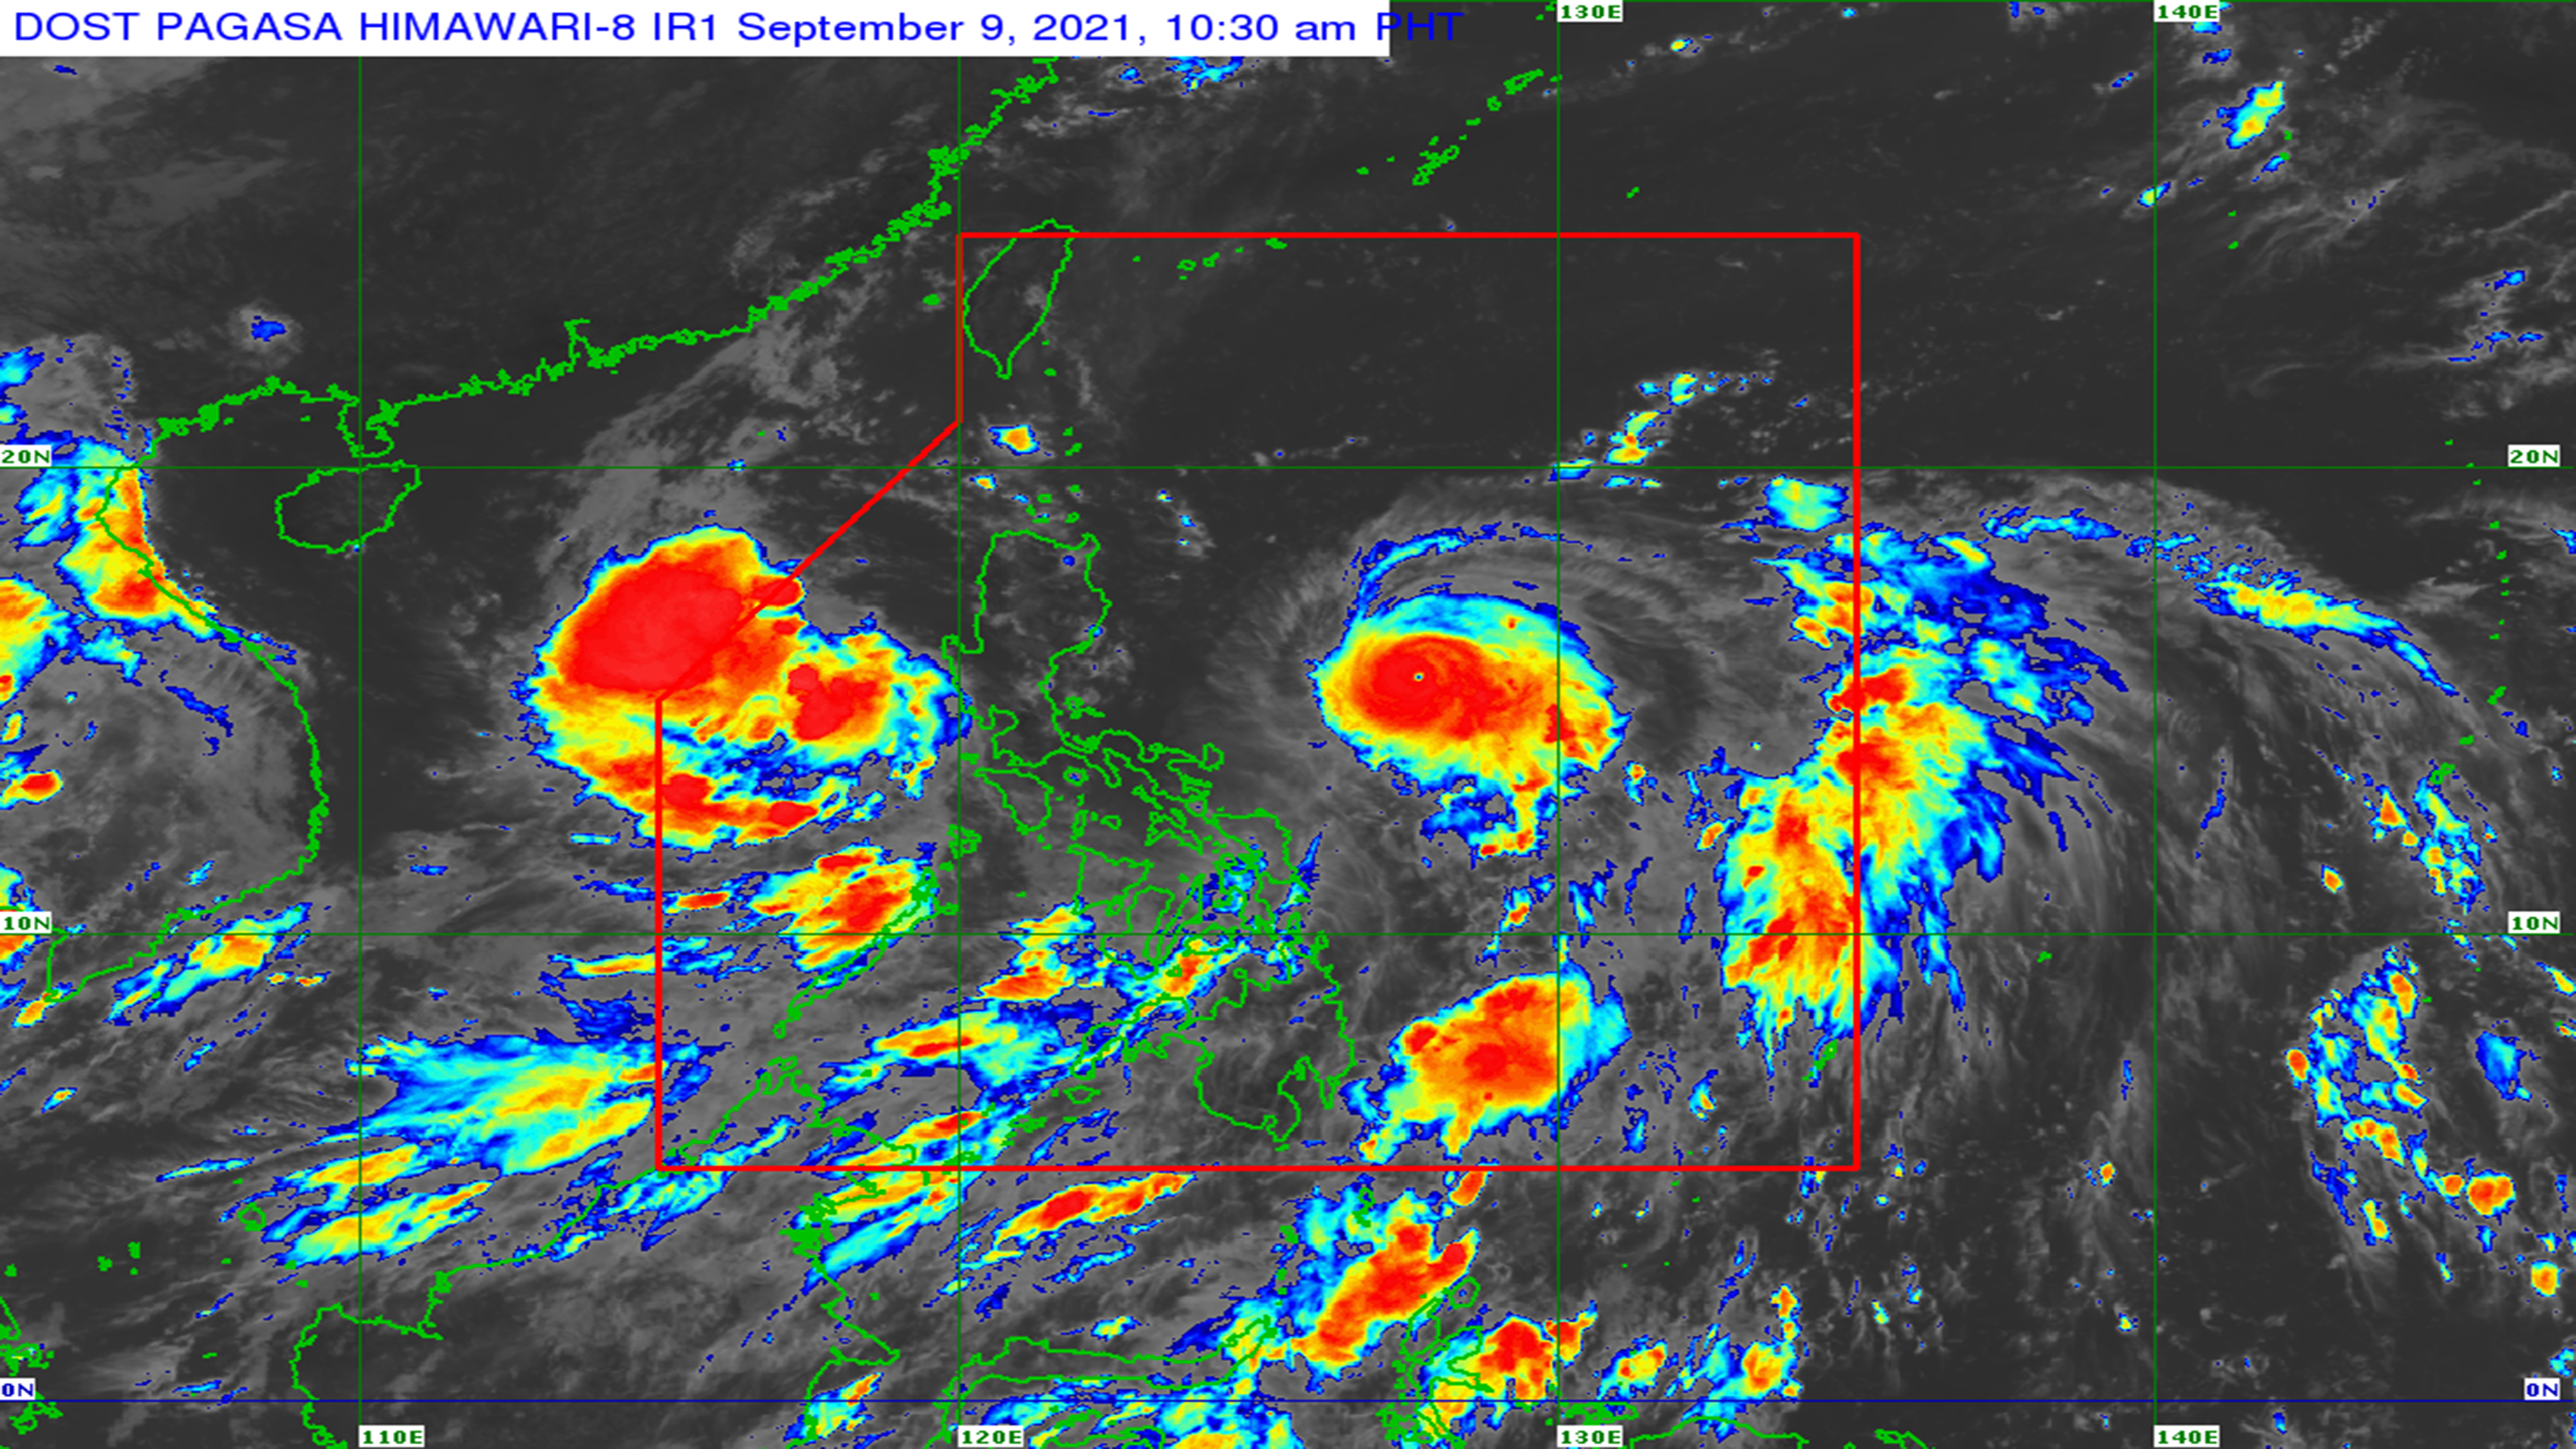 Signal No. 1 up in parts of Luzon due to 'Jolina', 'Kiko' photo from Dost_Pagasa